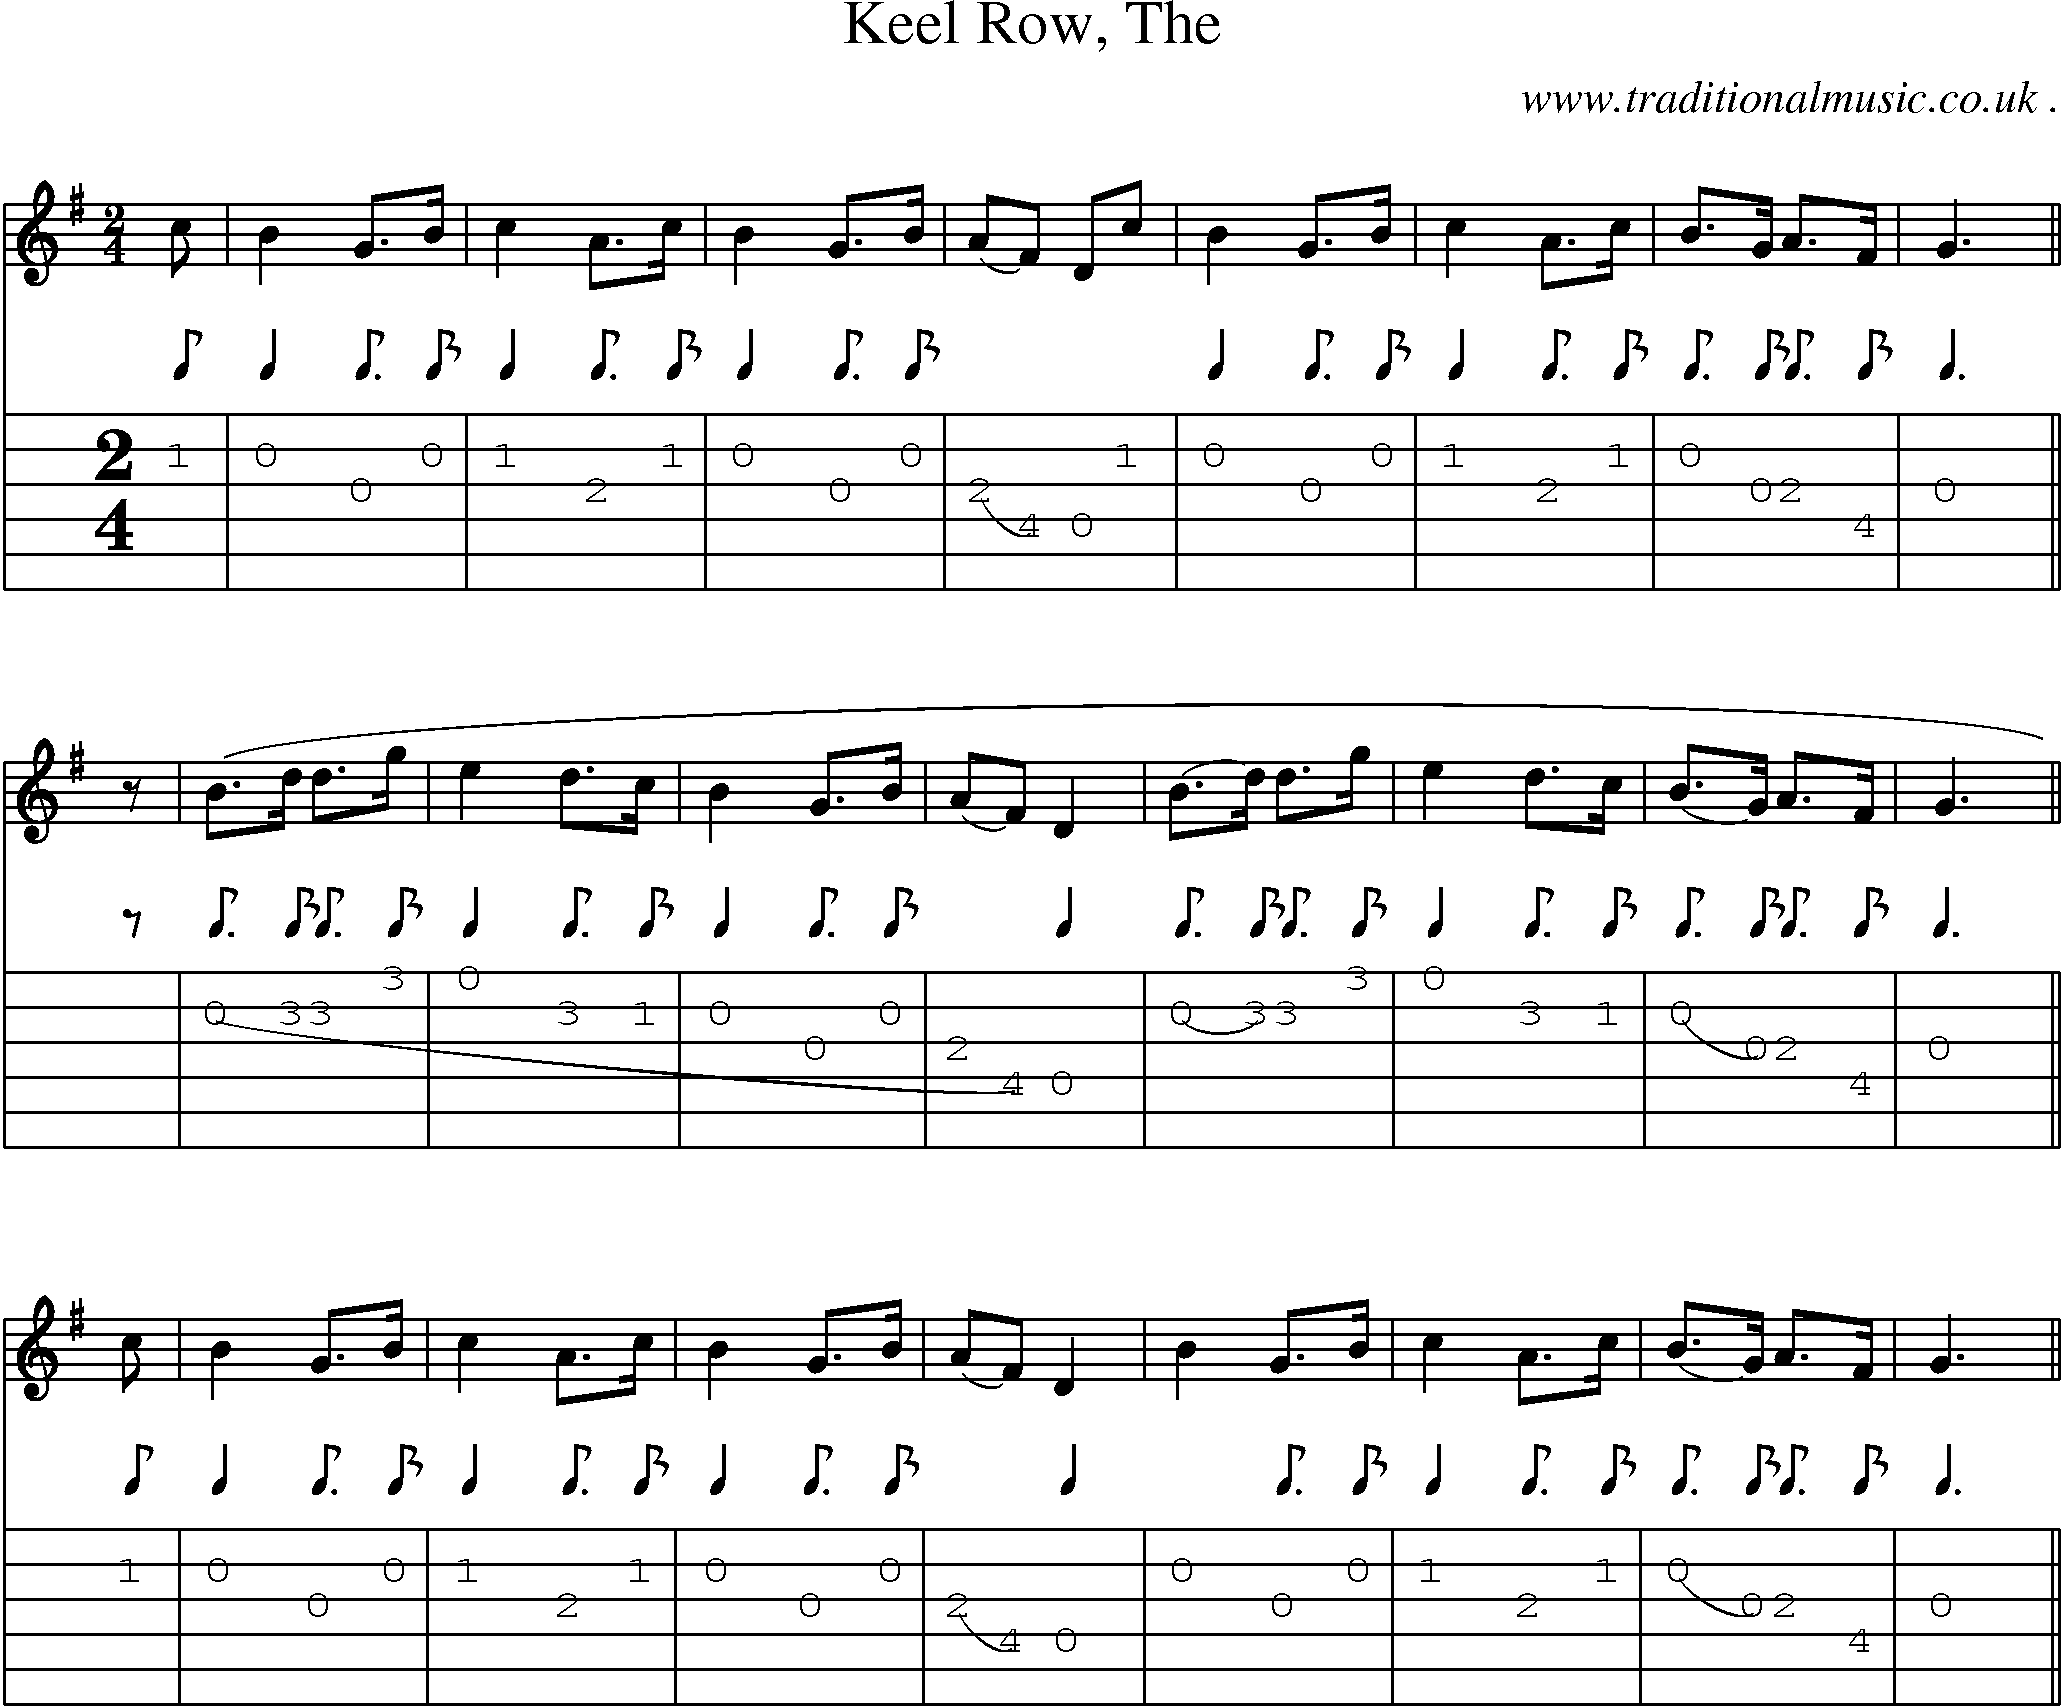 Sheet-music  score, Chords and Guitar Tabs for Keel Row The